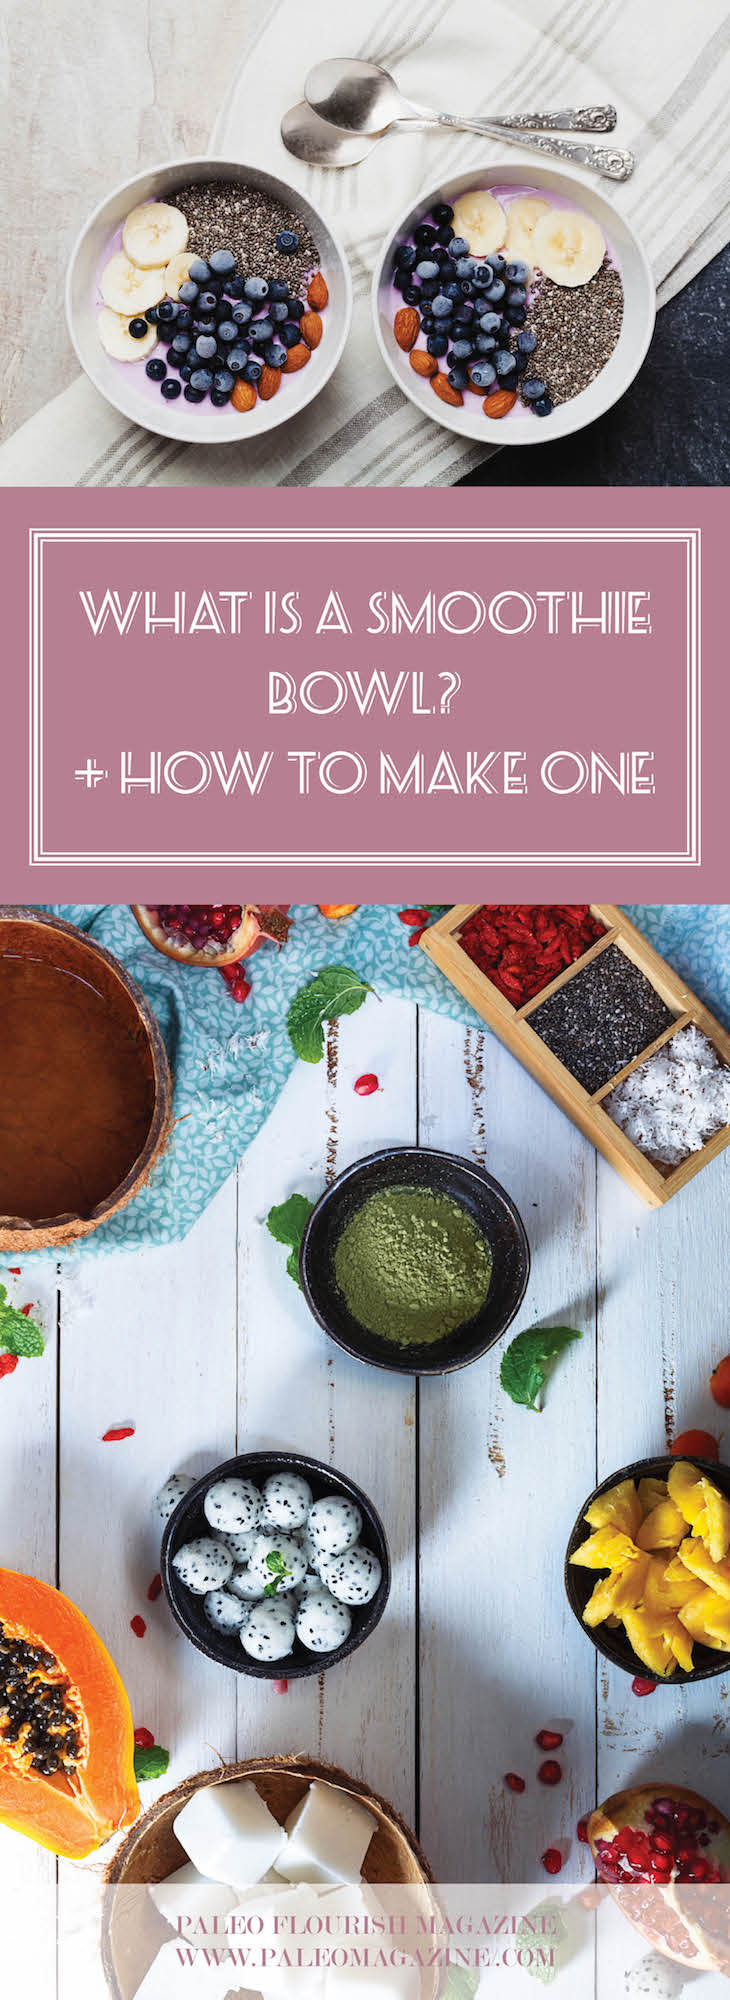 What is a Smoothie Bowl and How to make a smoothie bowl #paleo #recipe #food https://paleoflourish.com/what-is-a-smoothie-bowl-how-to-make-a-smoothie-bowl